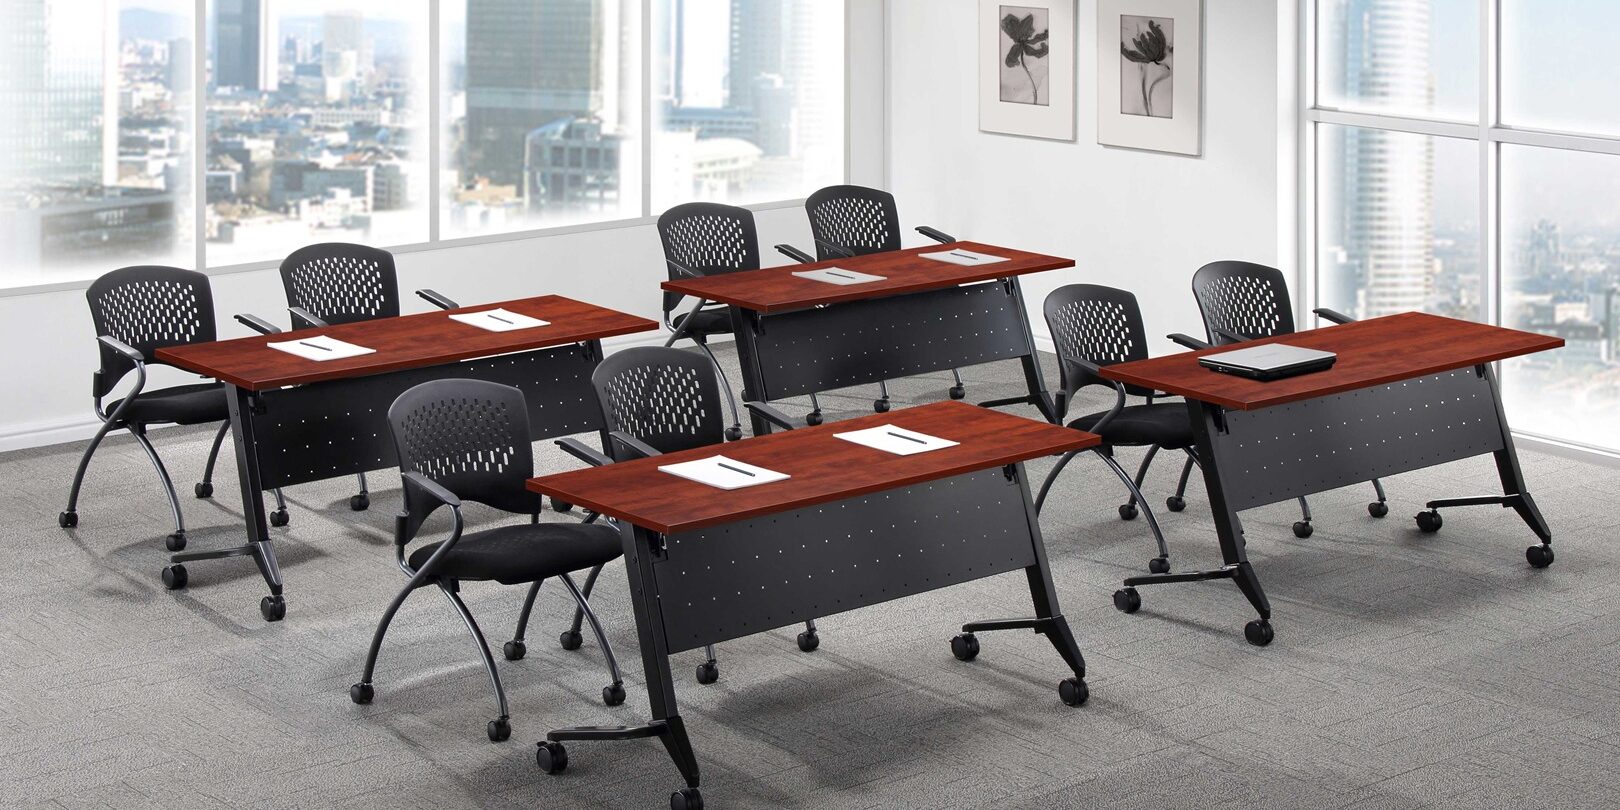 A group of tables and chairs in an office setting.